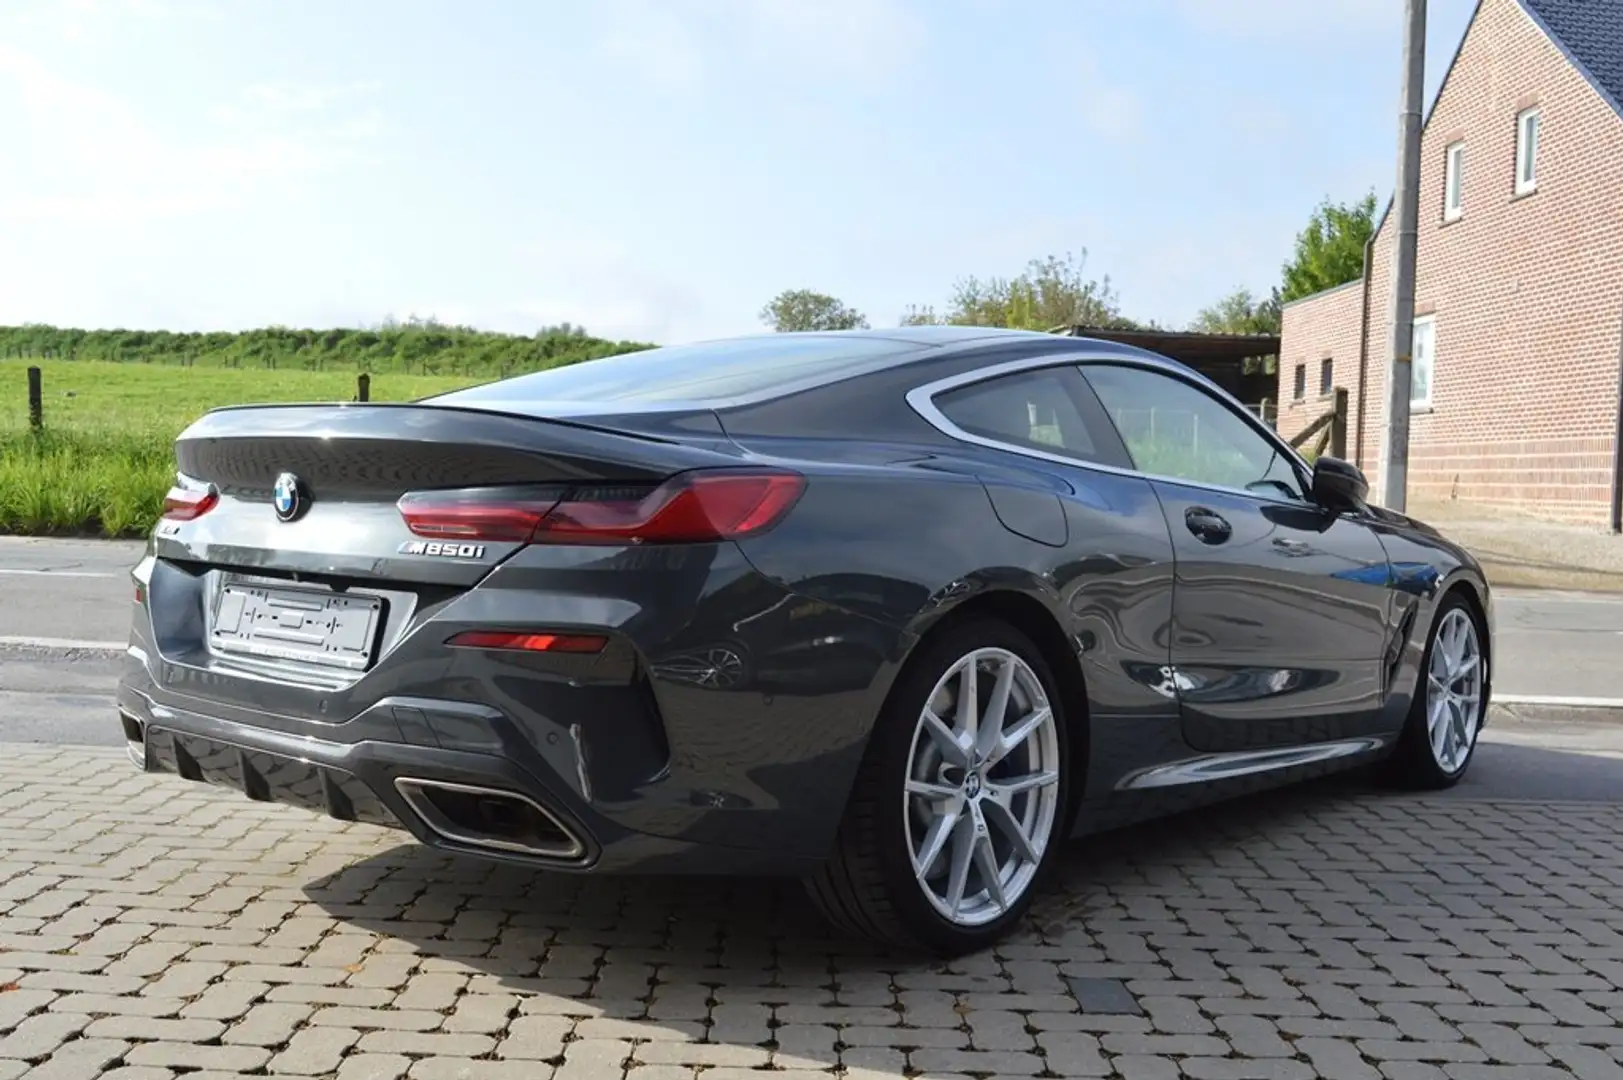 BMW 850 i xdrive 64.000 km ! Carbon pack ! Top condition ! siva - 2